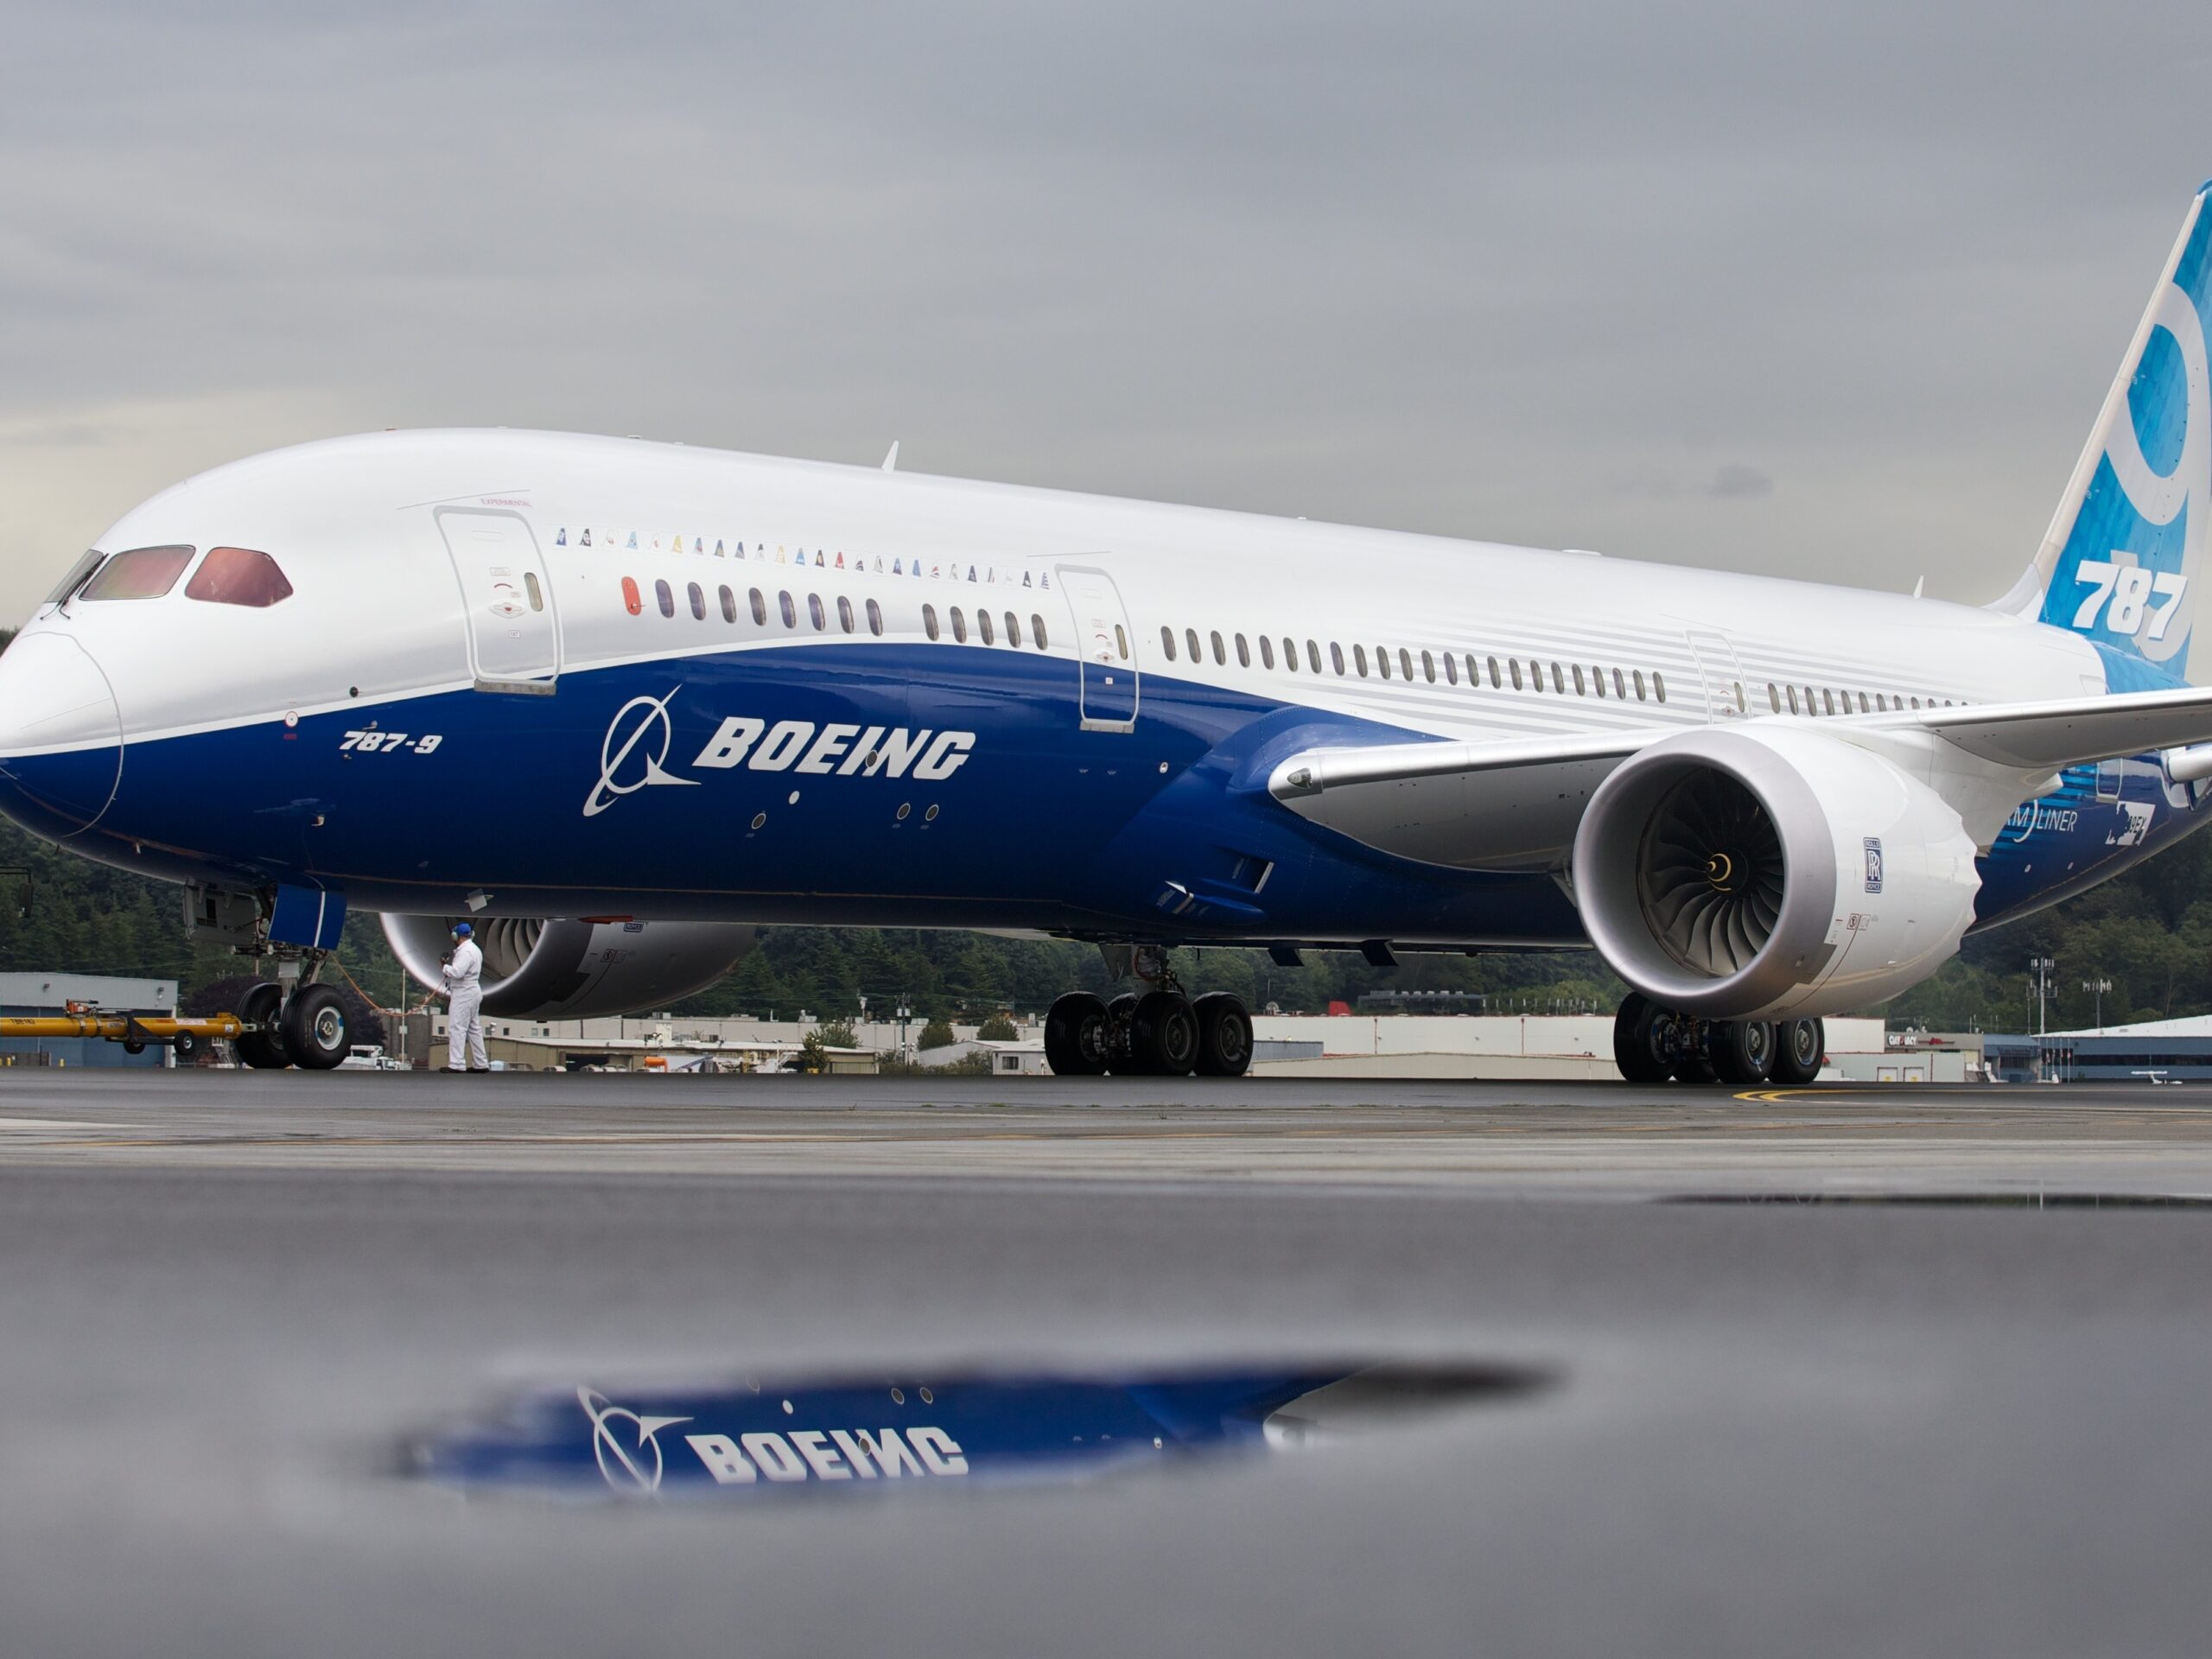 A Boeing whistleblower raises fresh concerns about the 787, and the FAA investigates